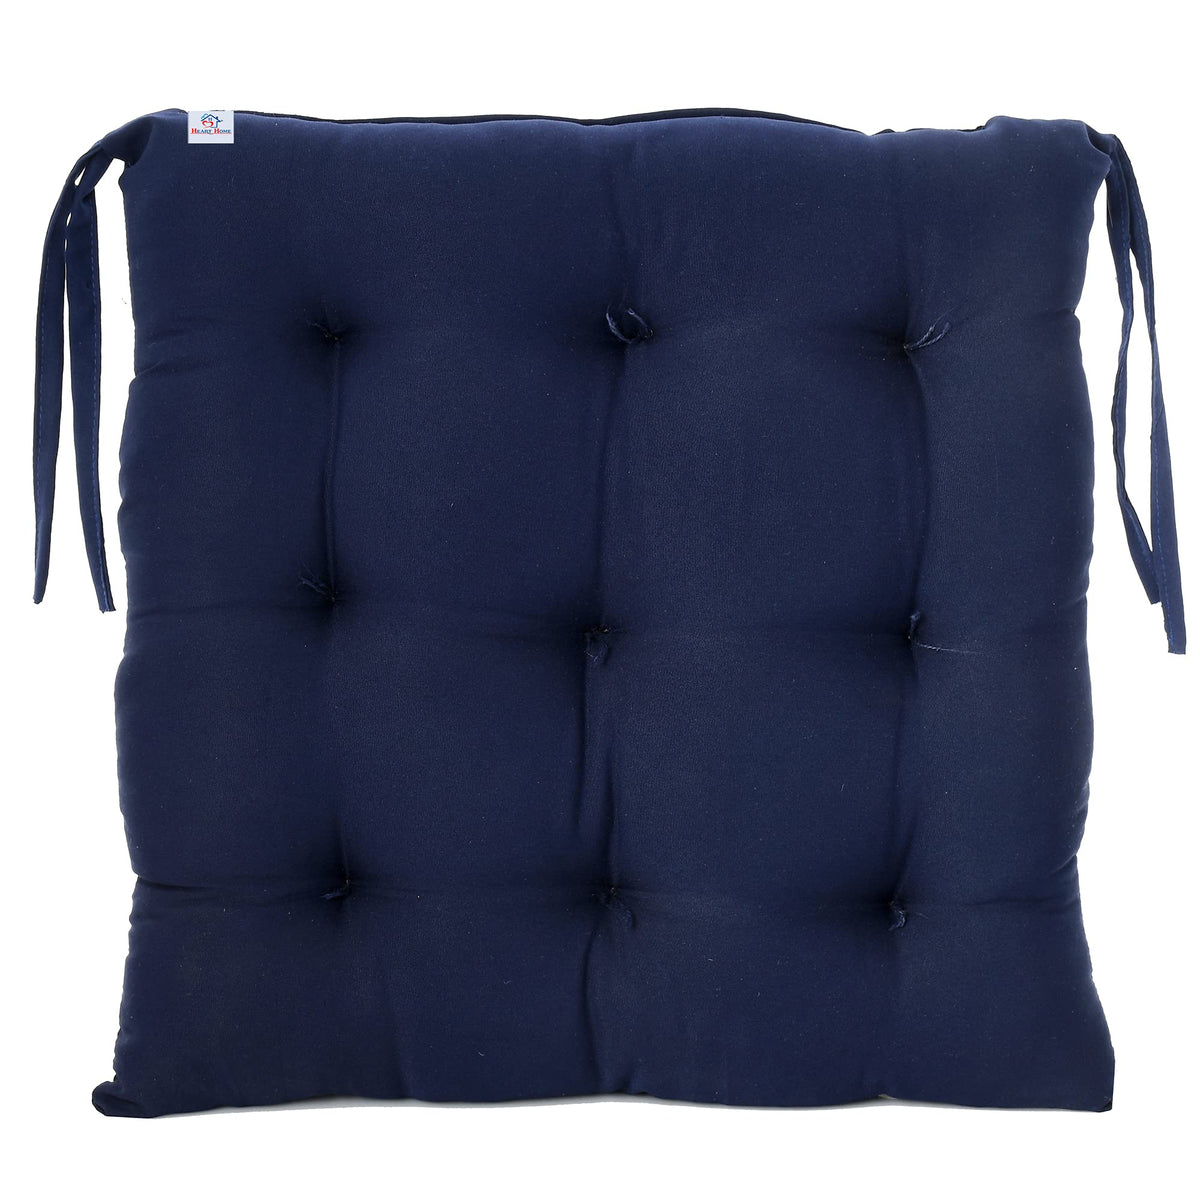 Heart Home Microfiber Square Chair Pad/Cushion for Office, Home or Car Sitting with Ties, 18 * 18 Inch (Navy Blue), Standard (HS_37_HEARTH020849)